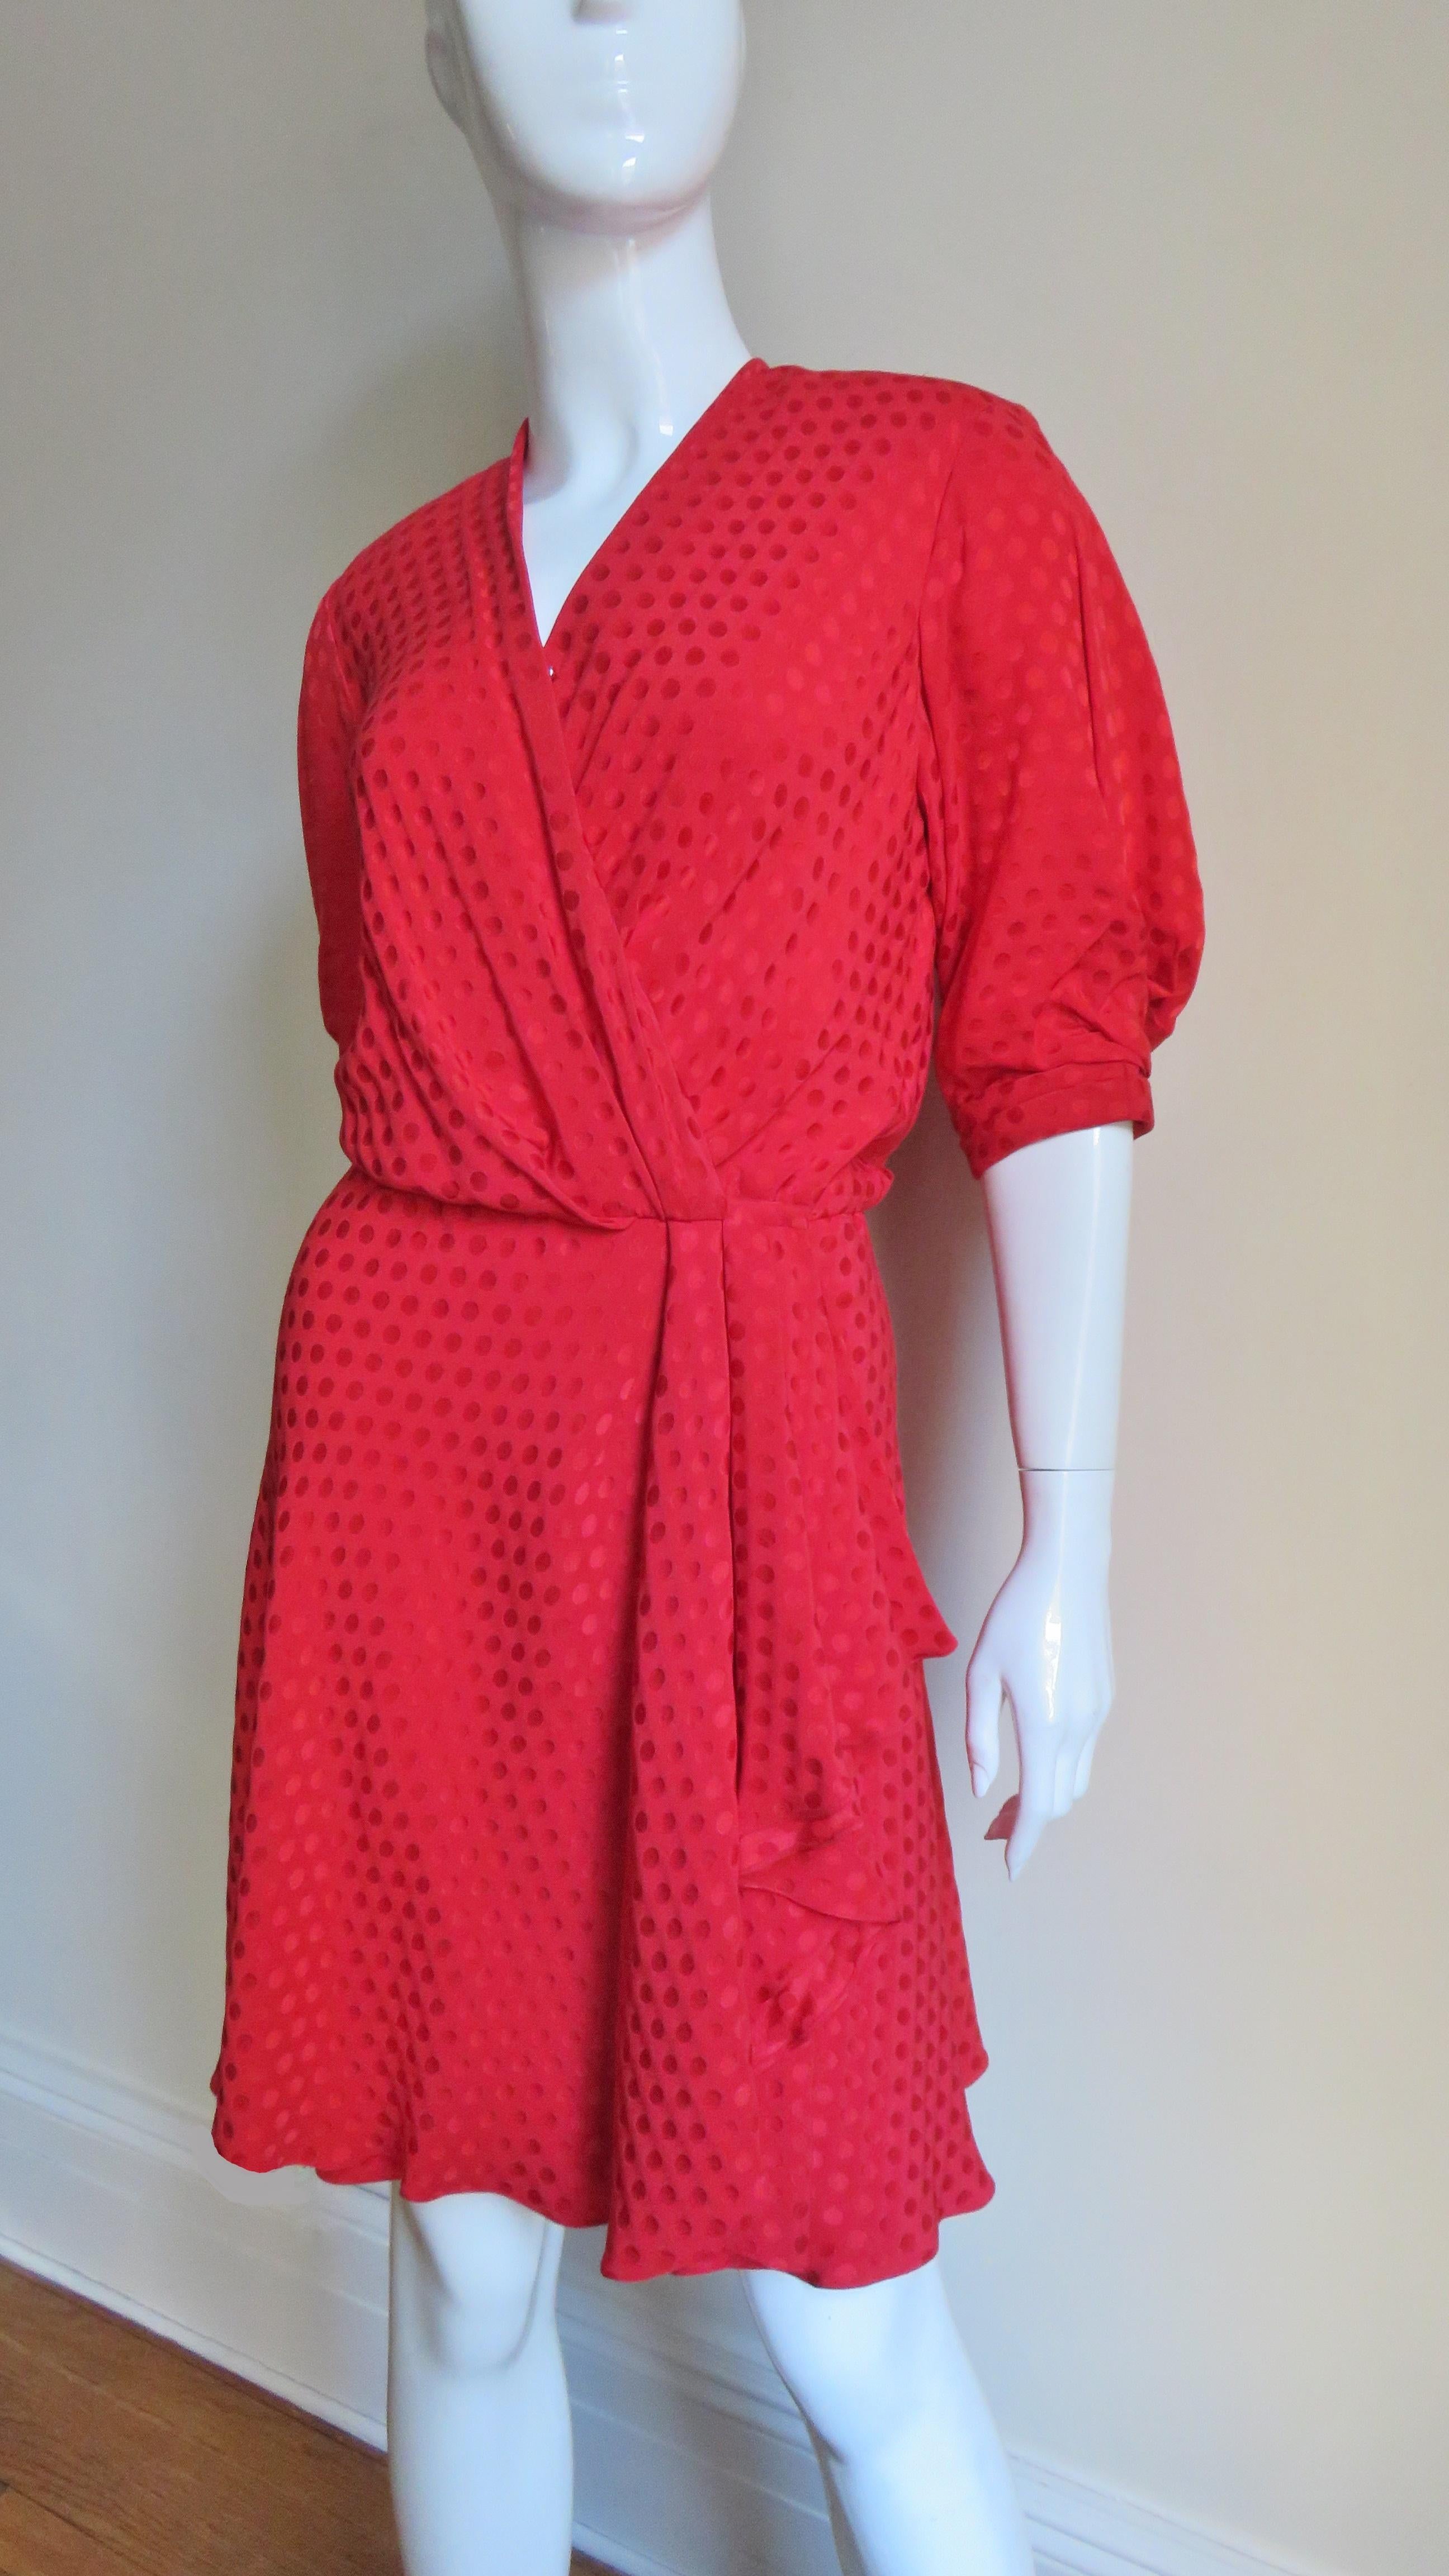 A beautiful red dot silk damask dress from French designer Jacqueline de Ribes.  It wraps across the front closing with a hook at the waist, matching silk covered snaps and a small zipper below it.  It has a V neck, draped blouson bodice and full,